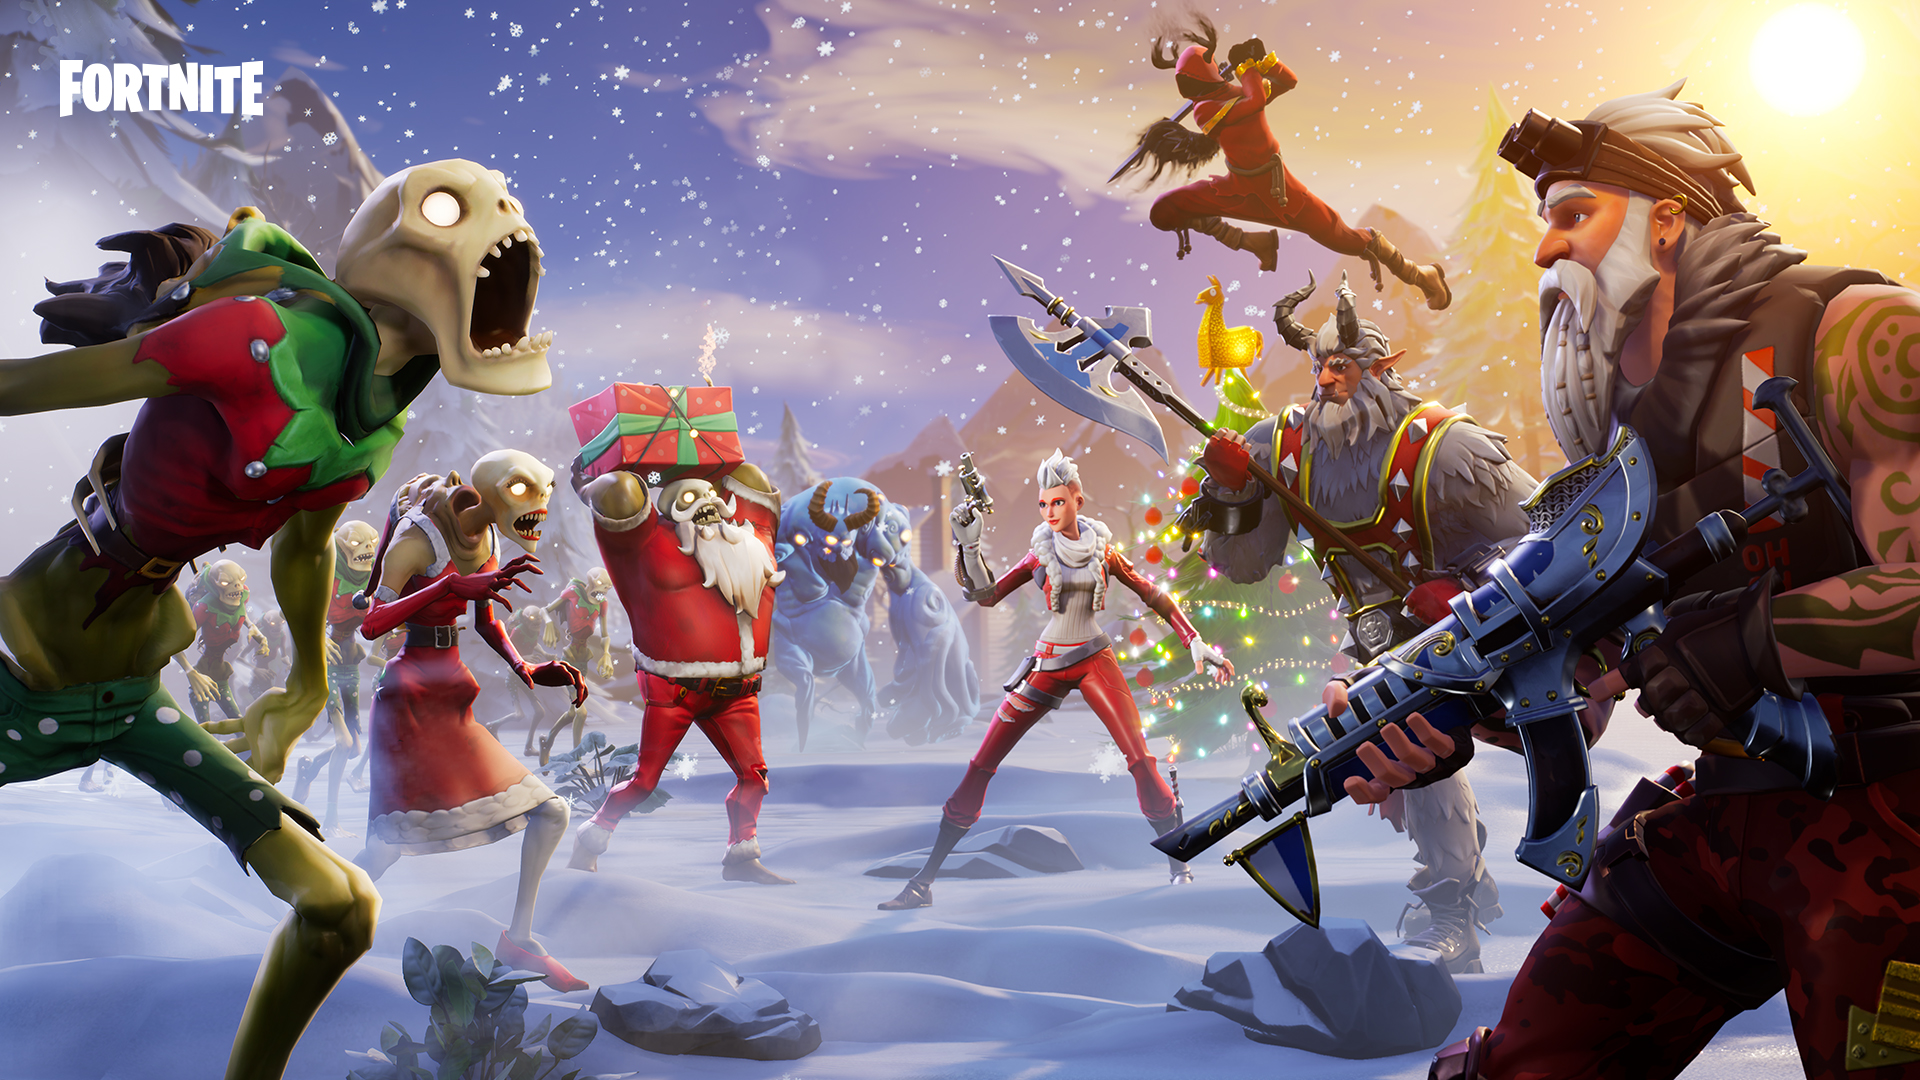 Fortnite V7 Patch Adds Days Of Event Winter Themed